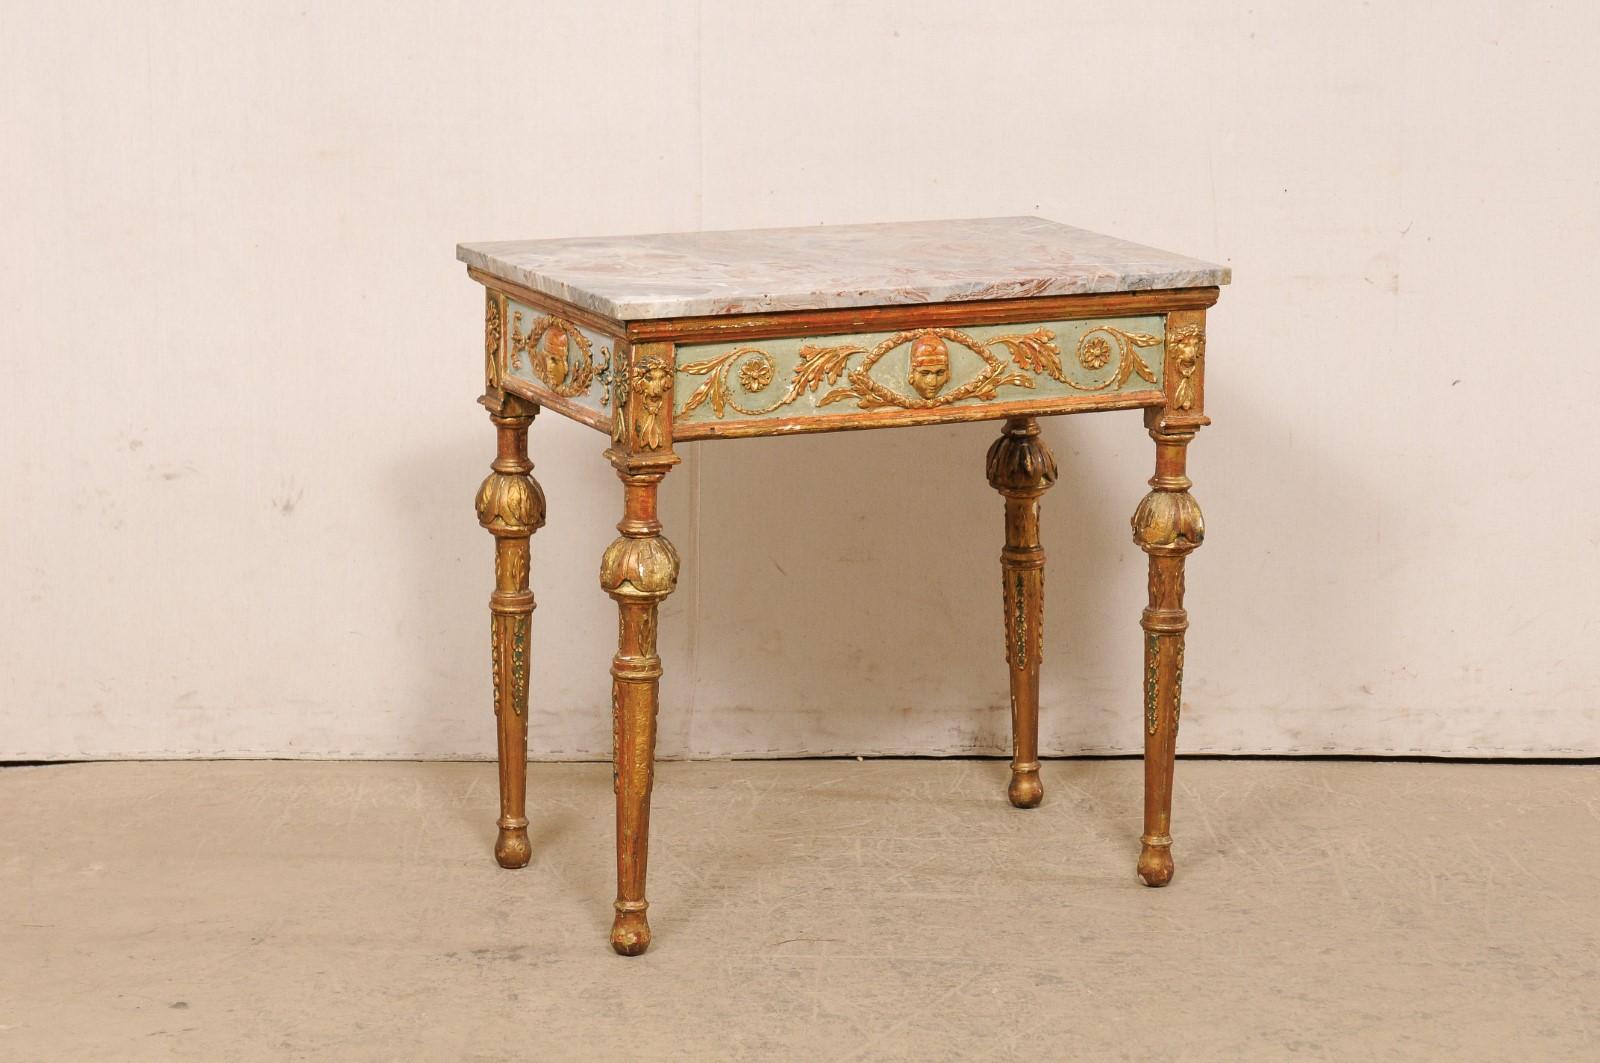 An Italian smaller-sized Neoclassical period carved and painted wood marble top console from the 18th century. This antique table from Italy features a rectangular-shaped marble top, which rests above an apron adorned with a male face within